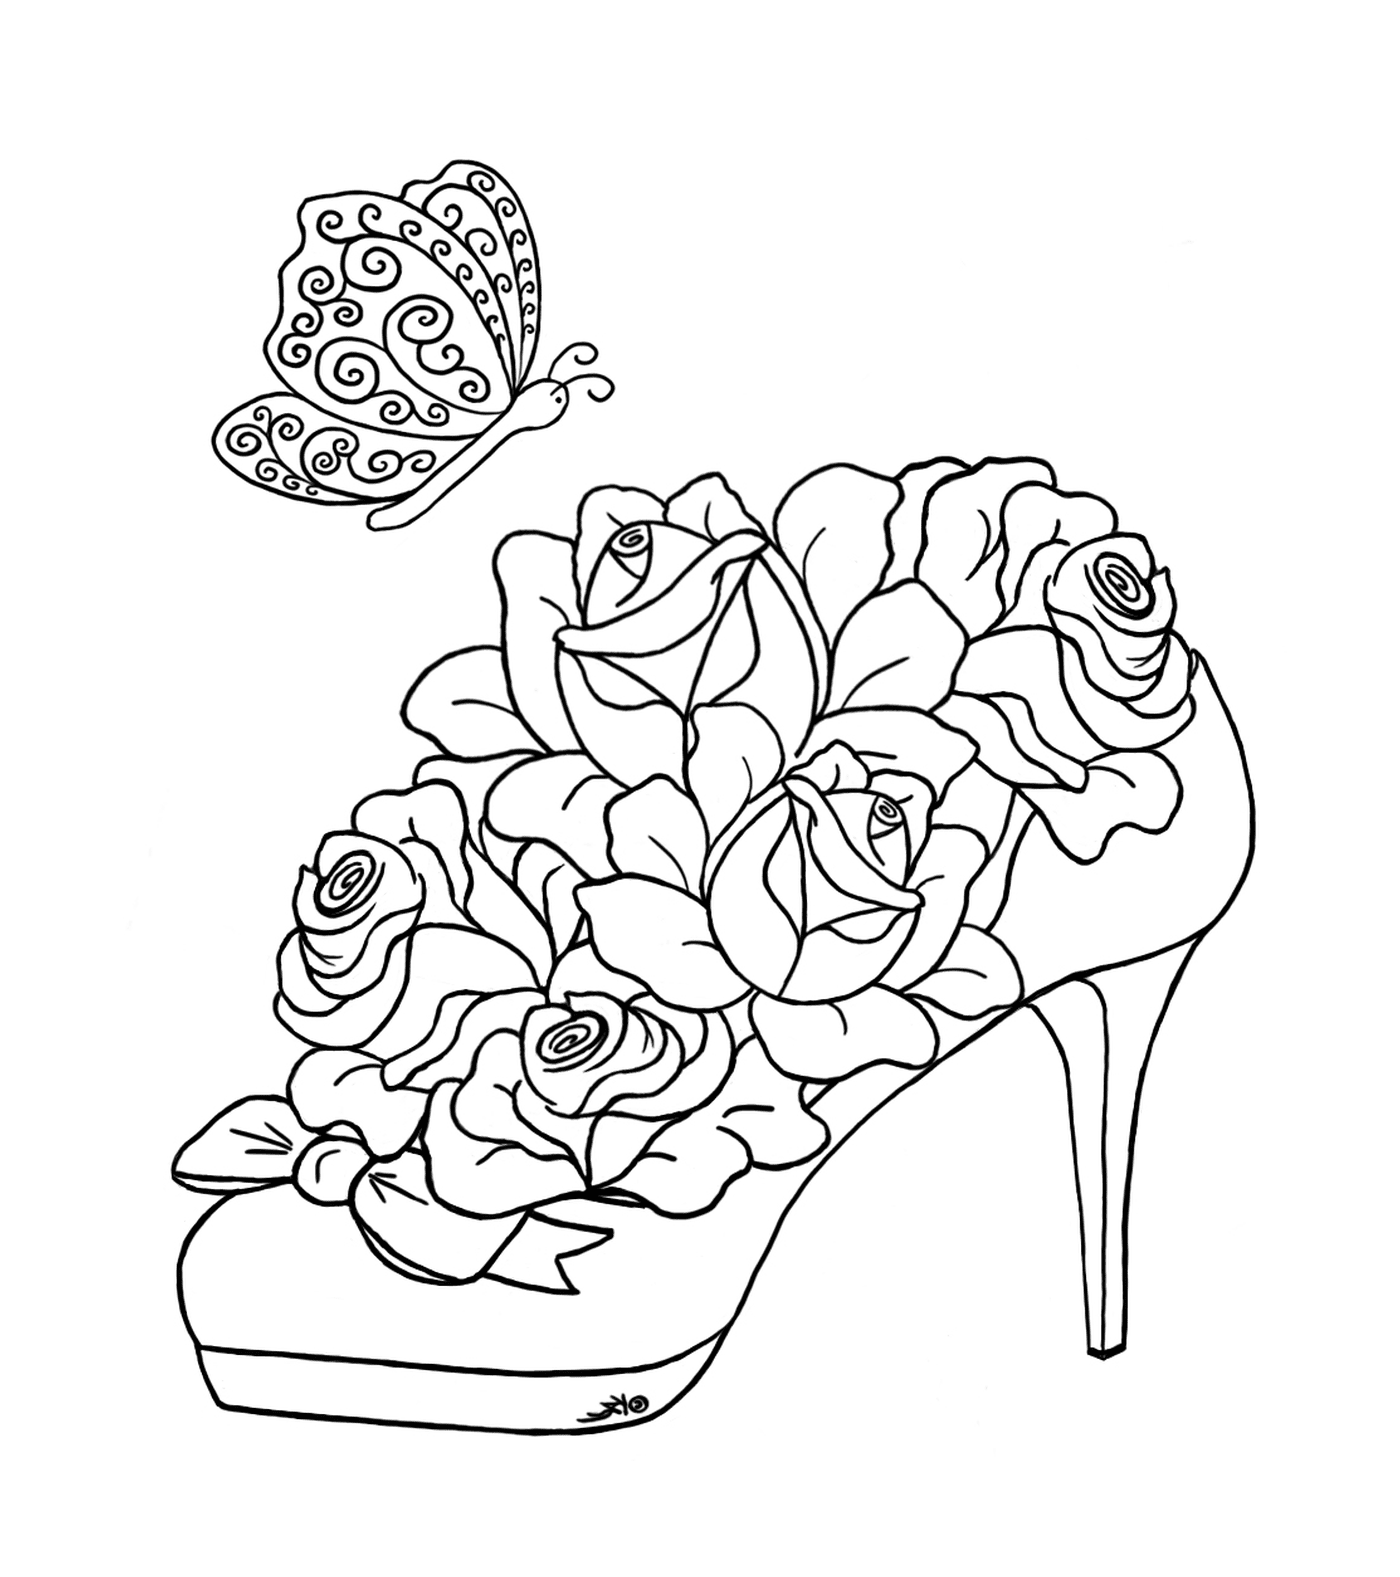  Shoes with decorative roses 